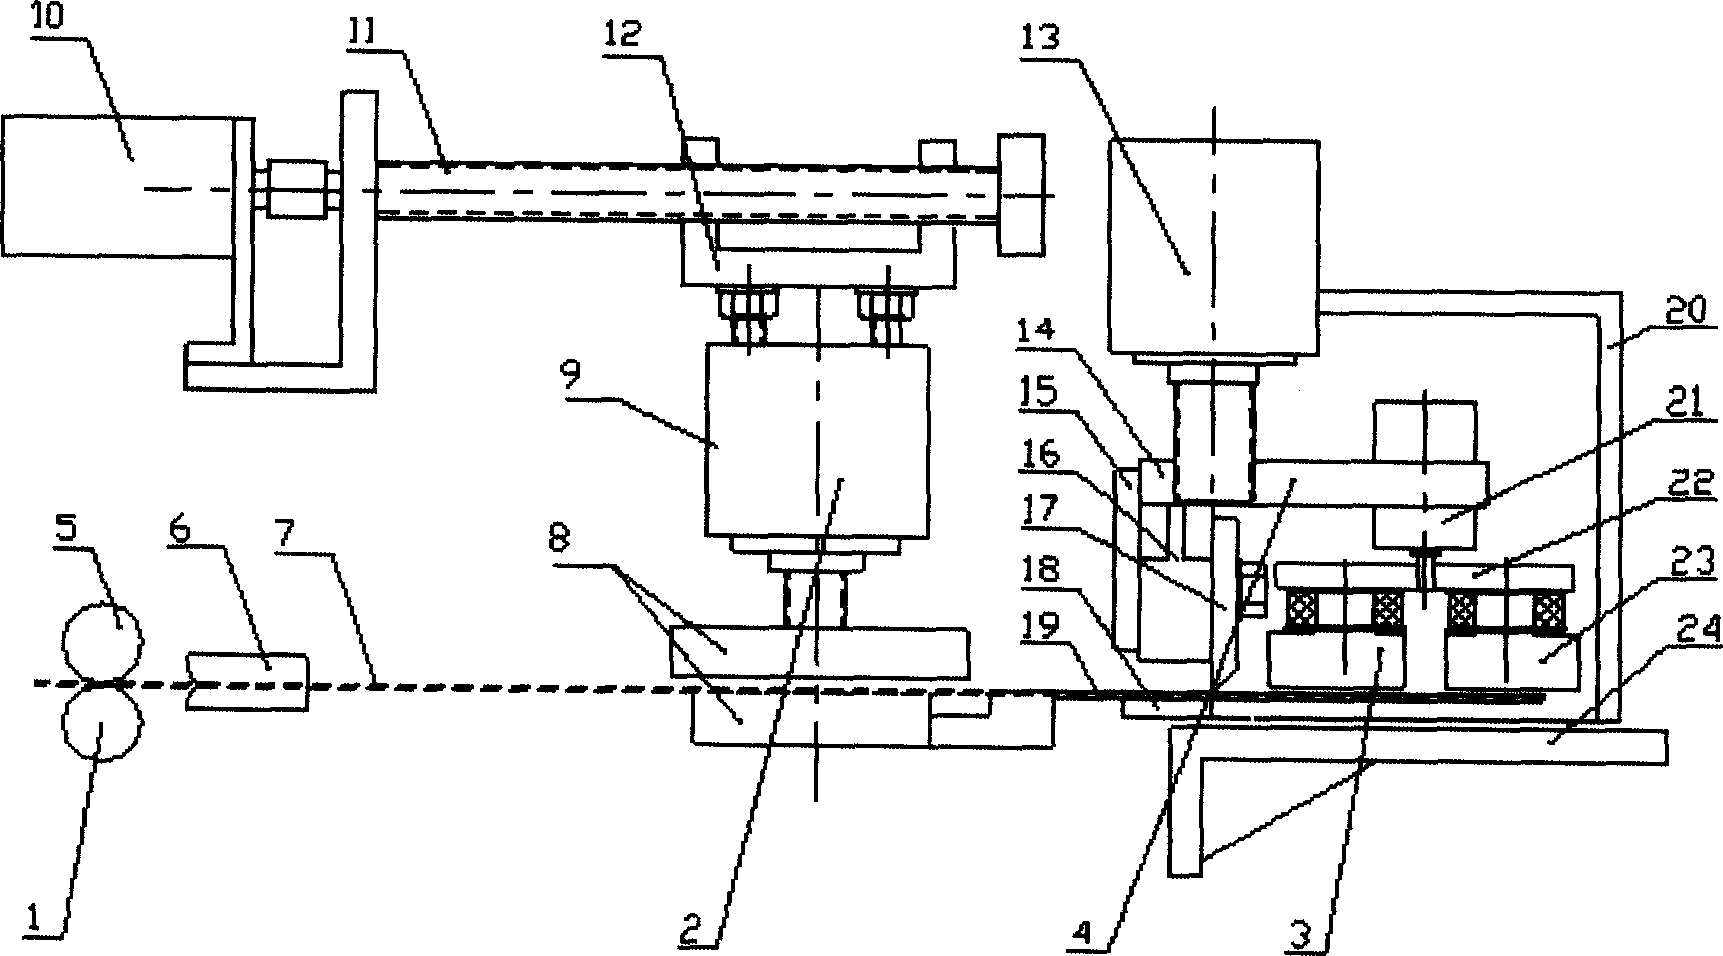 Feeding cutting and pressing binding device of flexible iron base thin belt material